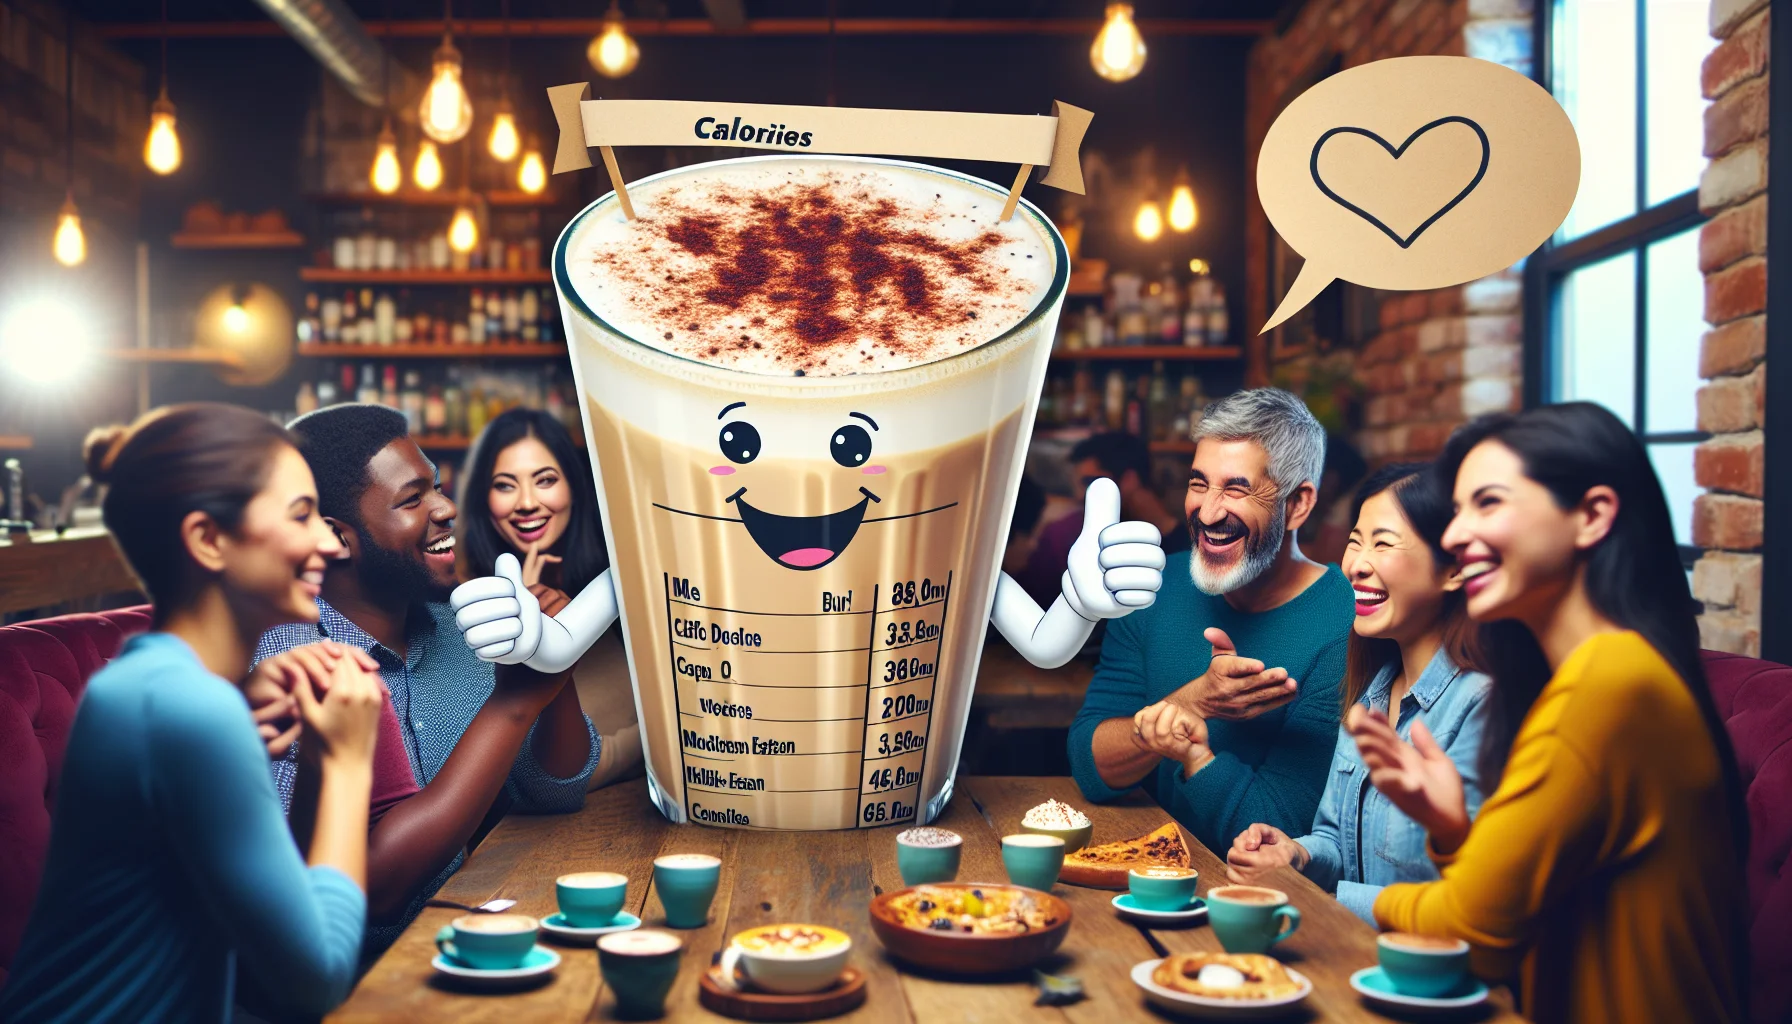 Create a humorously enticing scene where a chart showcasing the calories in a chai tea latte comes to life. The calorie chart could be delightfully grinning and inviting people to enjoy the drink, while holding a big cup of creamy frothy chai tea latte. Add a detailed background of a cozy cafe atmosphere with comforting warm lights and wooden furniture in abundance. A diverse group of people, including Hispanic men, Asian women, Middle-Eastern individuals, etc, could be around, having a good time, some of them intrigued by the amusing calorie chart.